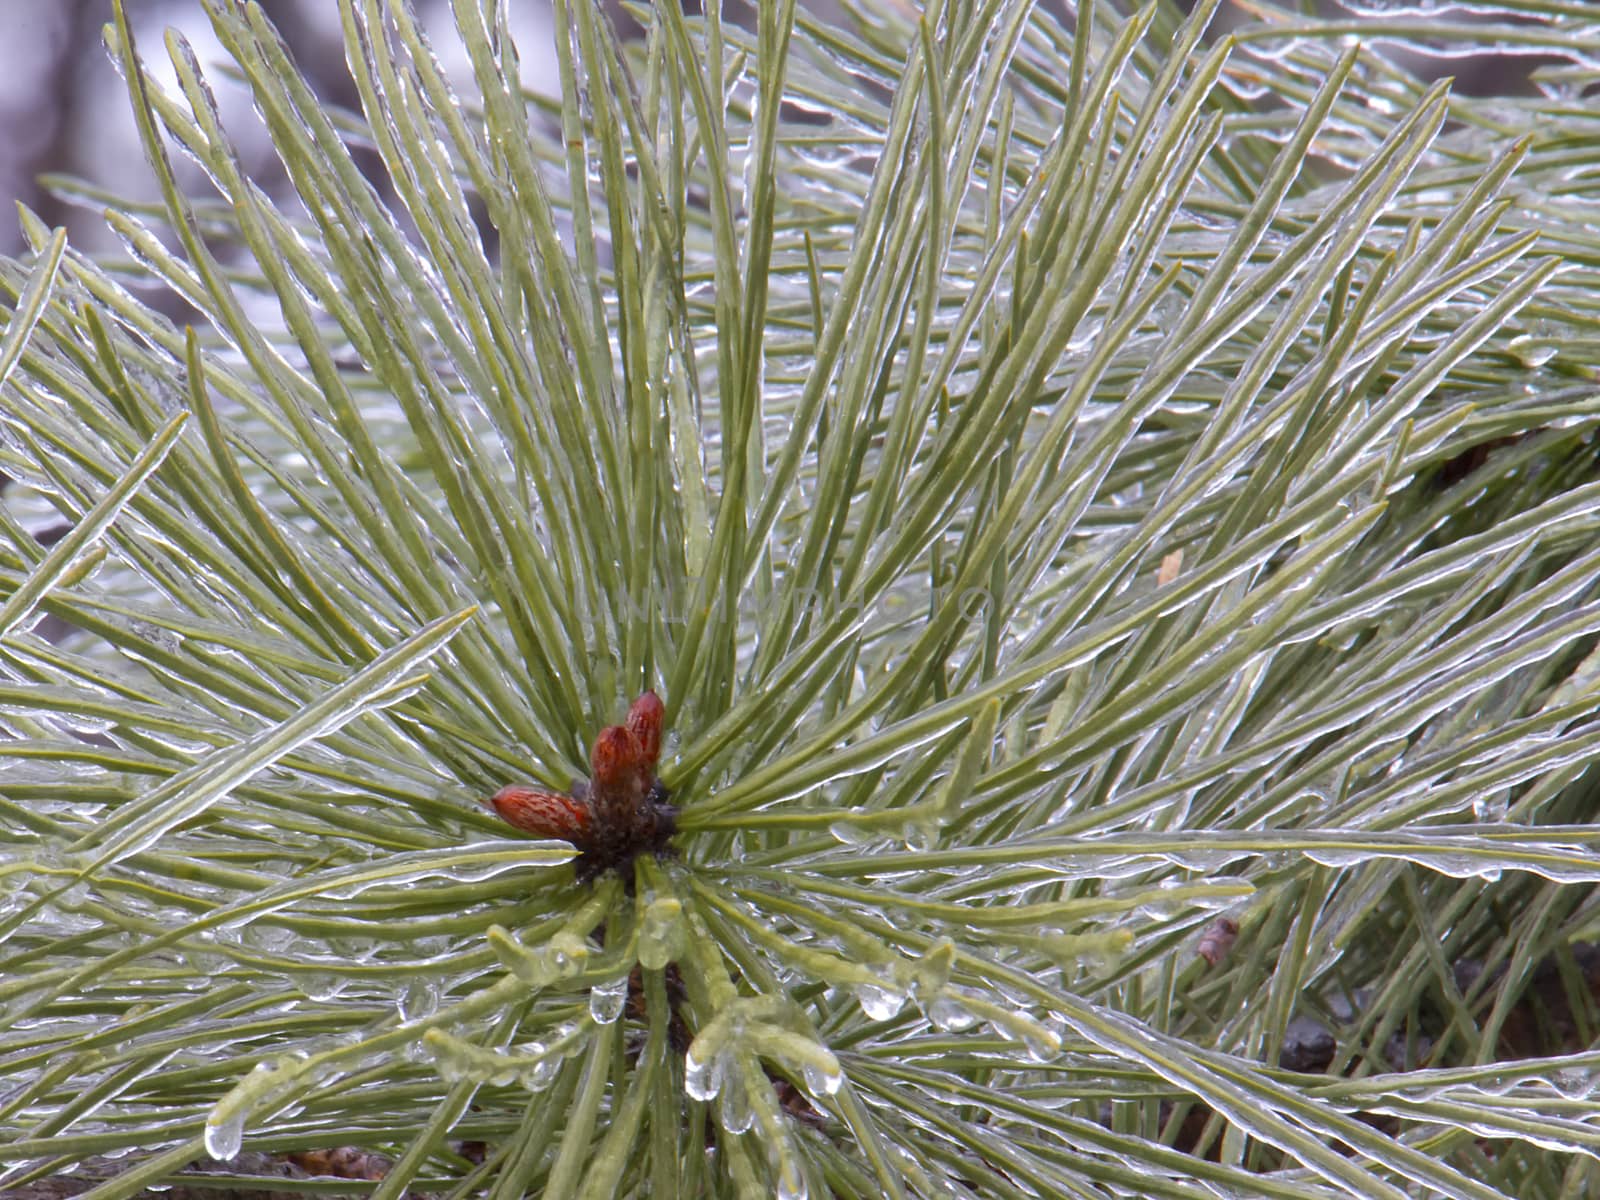 Frozen Pine Needles by CharlieFloyd